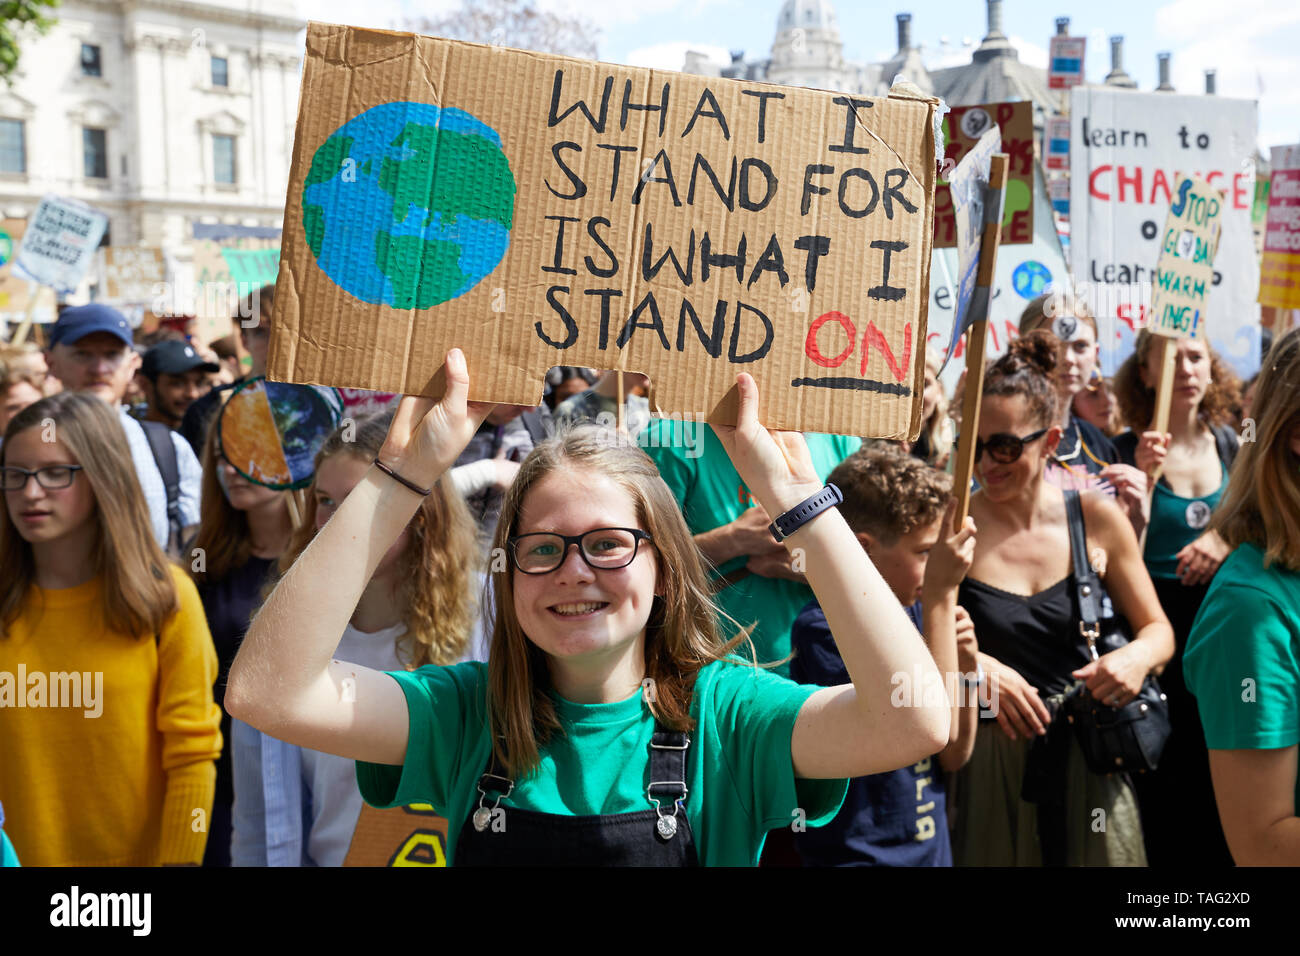 London, U.K. - 24 May, 2019: A placard held by a young demonstrator, campaigning against global warming as part of the Youth Strike 4 Climate movement. Stock Photo